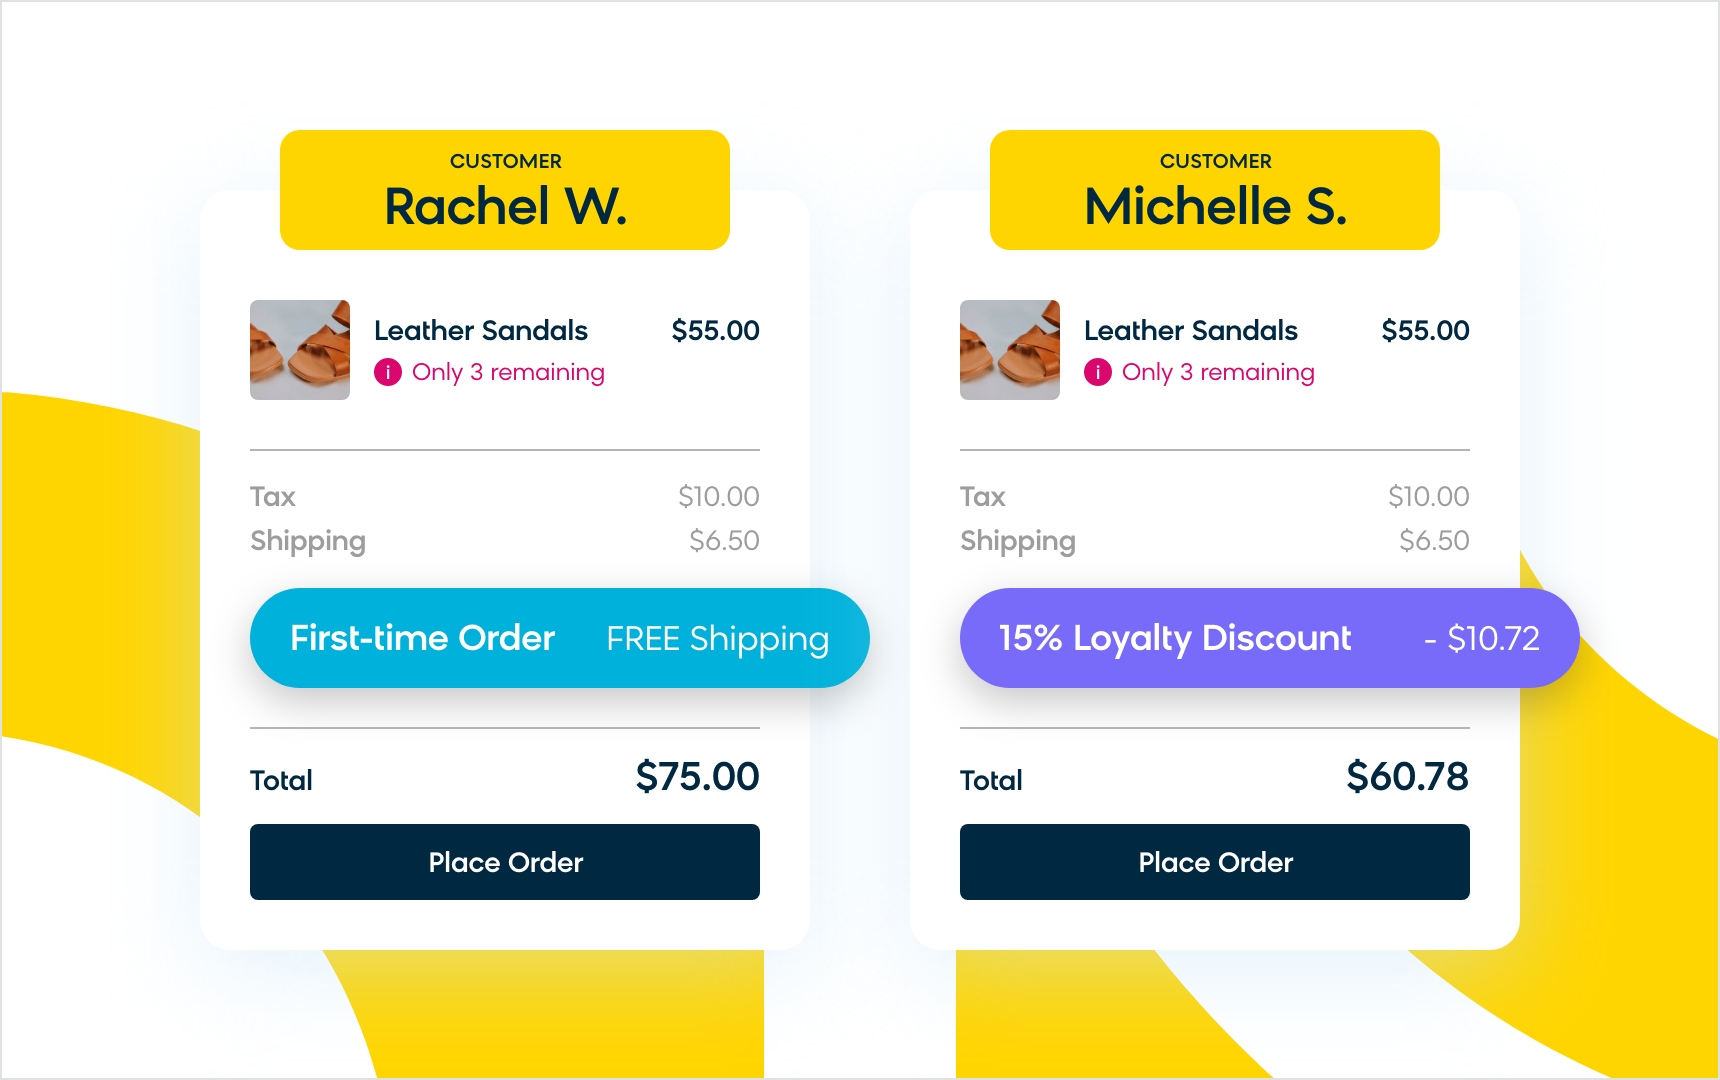 Two variations of web personalization, which both serve individualized incentives to different customers